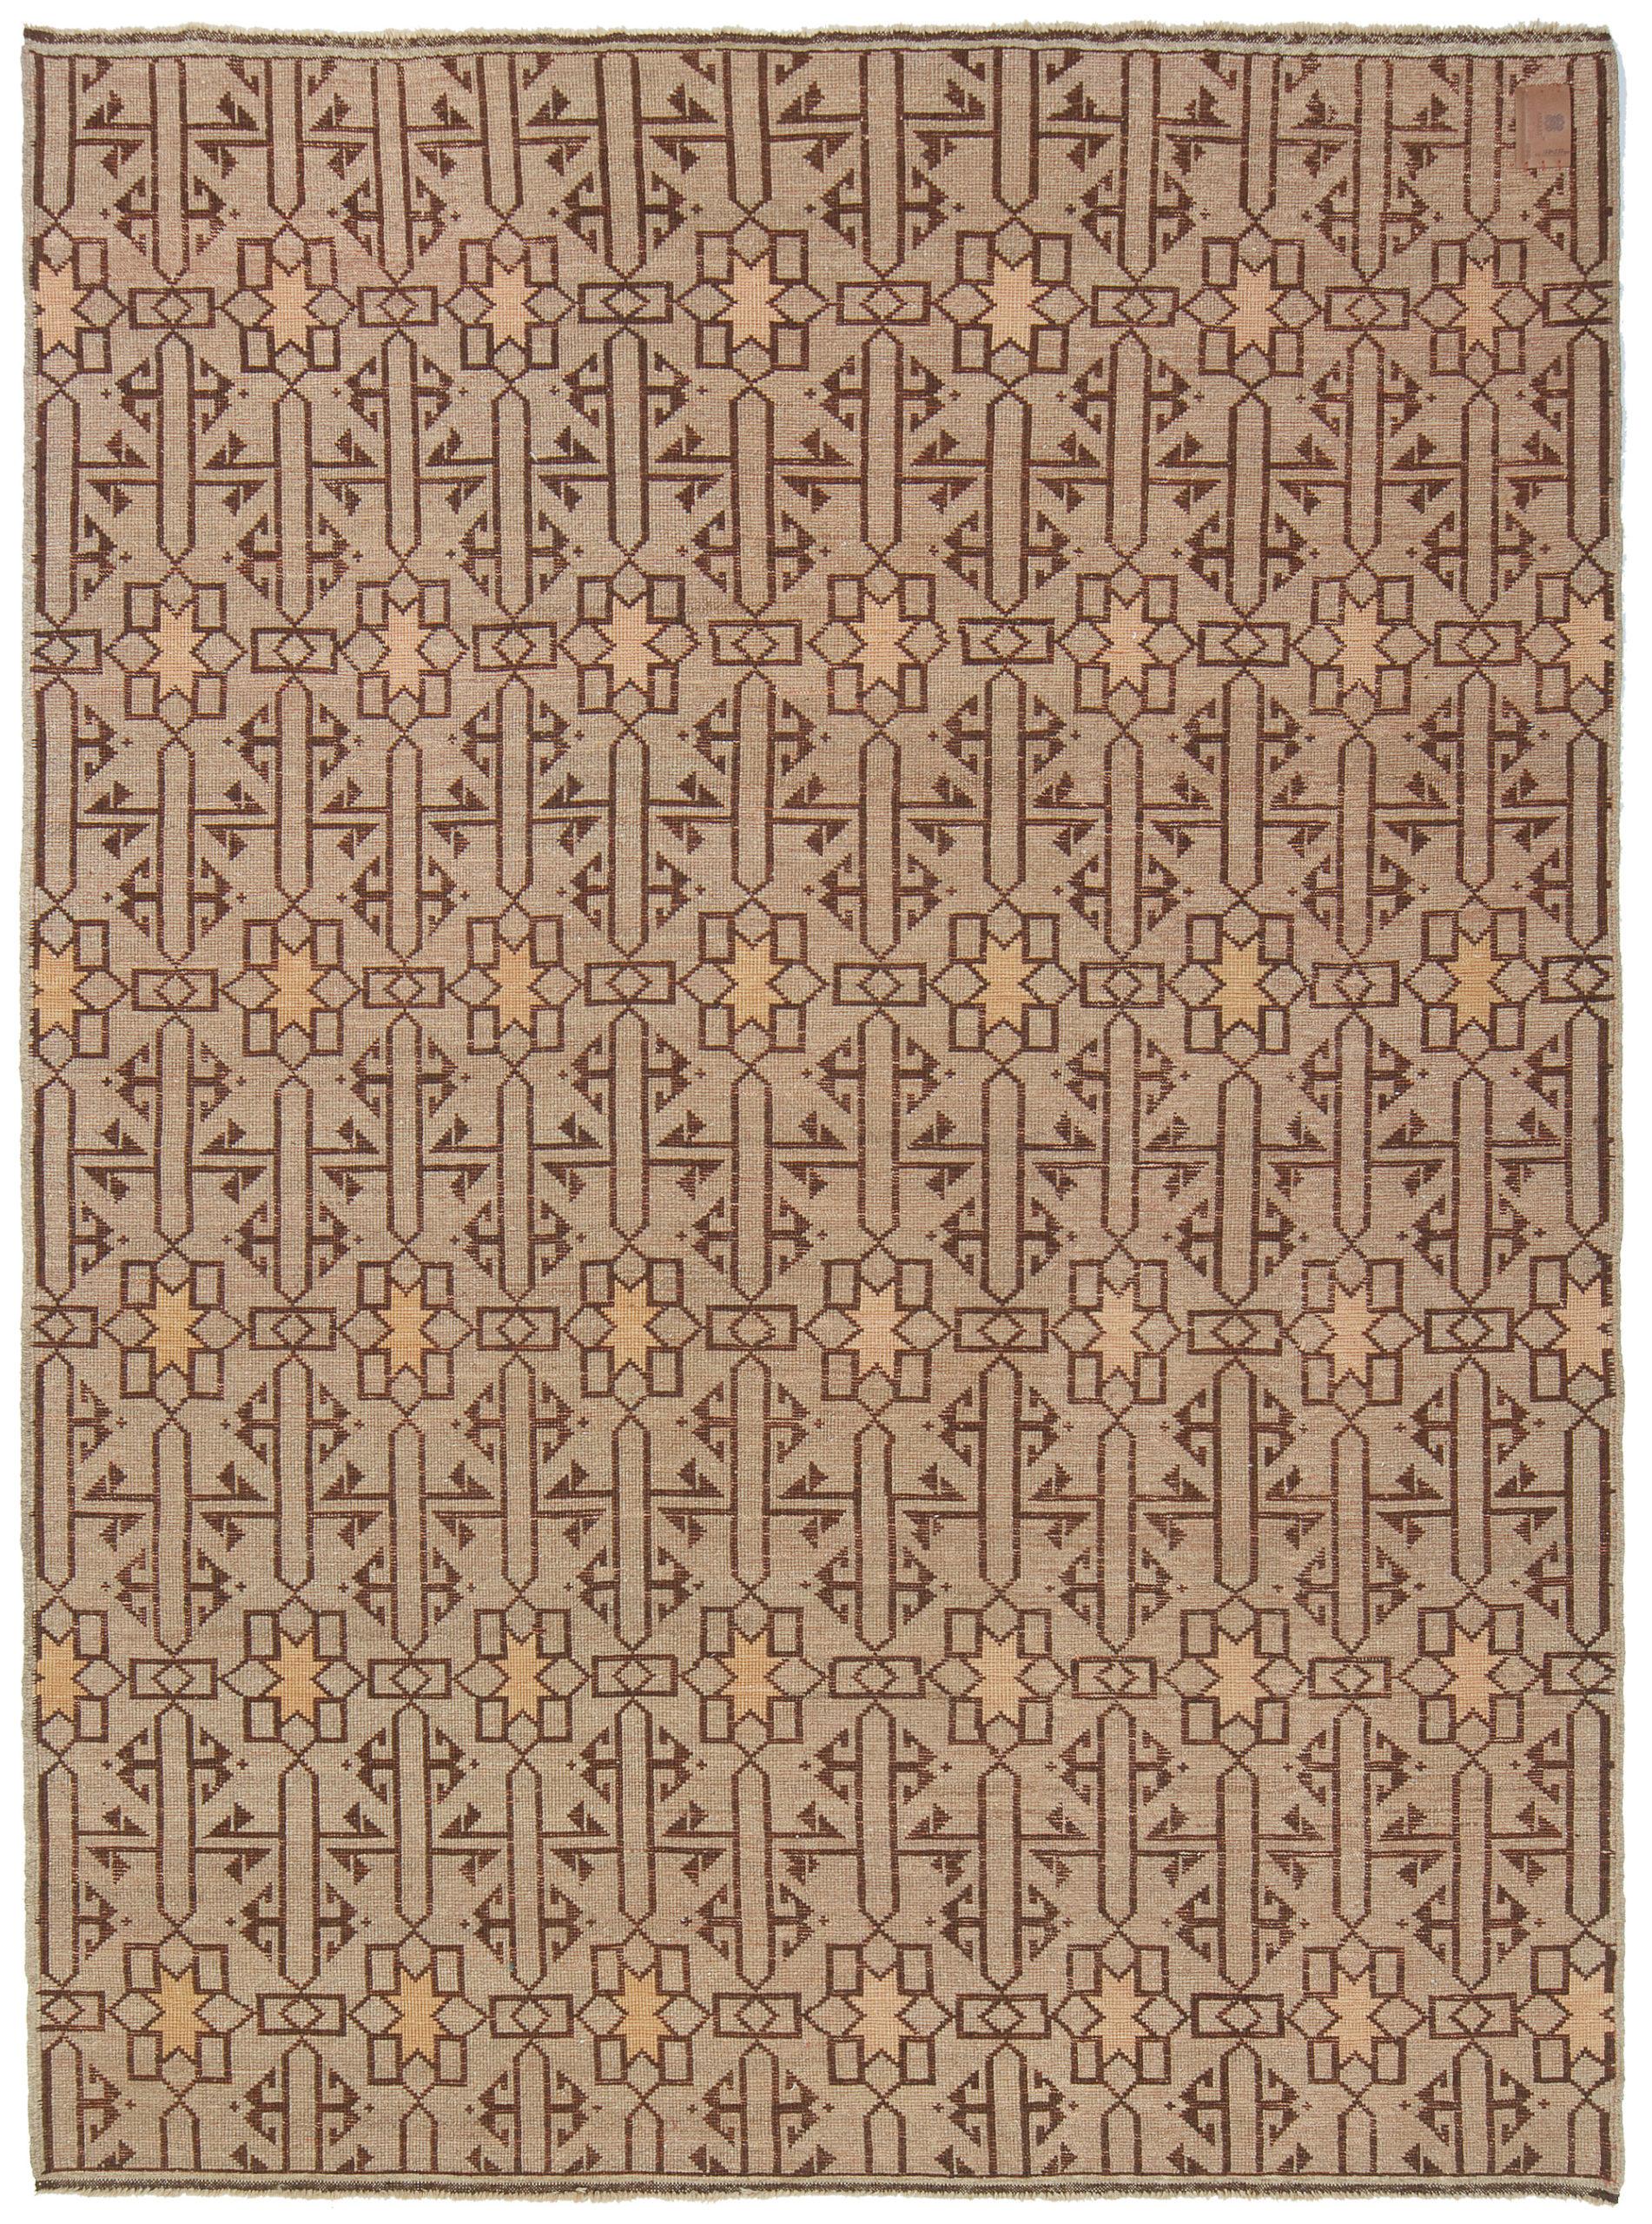 The source of the carpet comes from the book Orient Stars Collection, Anatolian Tribal Rugs 1050-1750, Michael Franses, Hali Publications Ltd, 2021 fig.23. This 13th-century carpet is from probably the Konya region, central Anatolia, circa 1200-1300